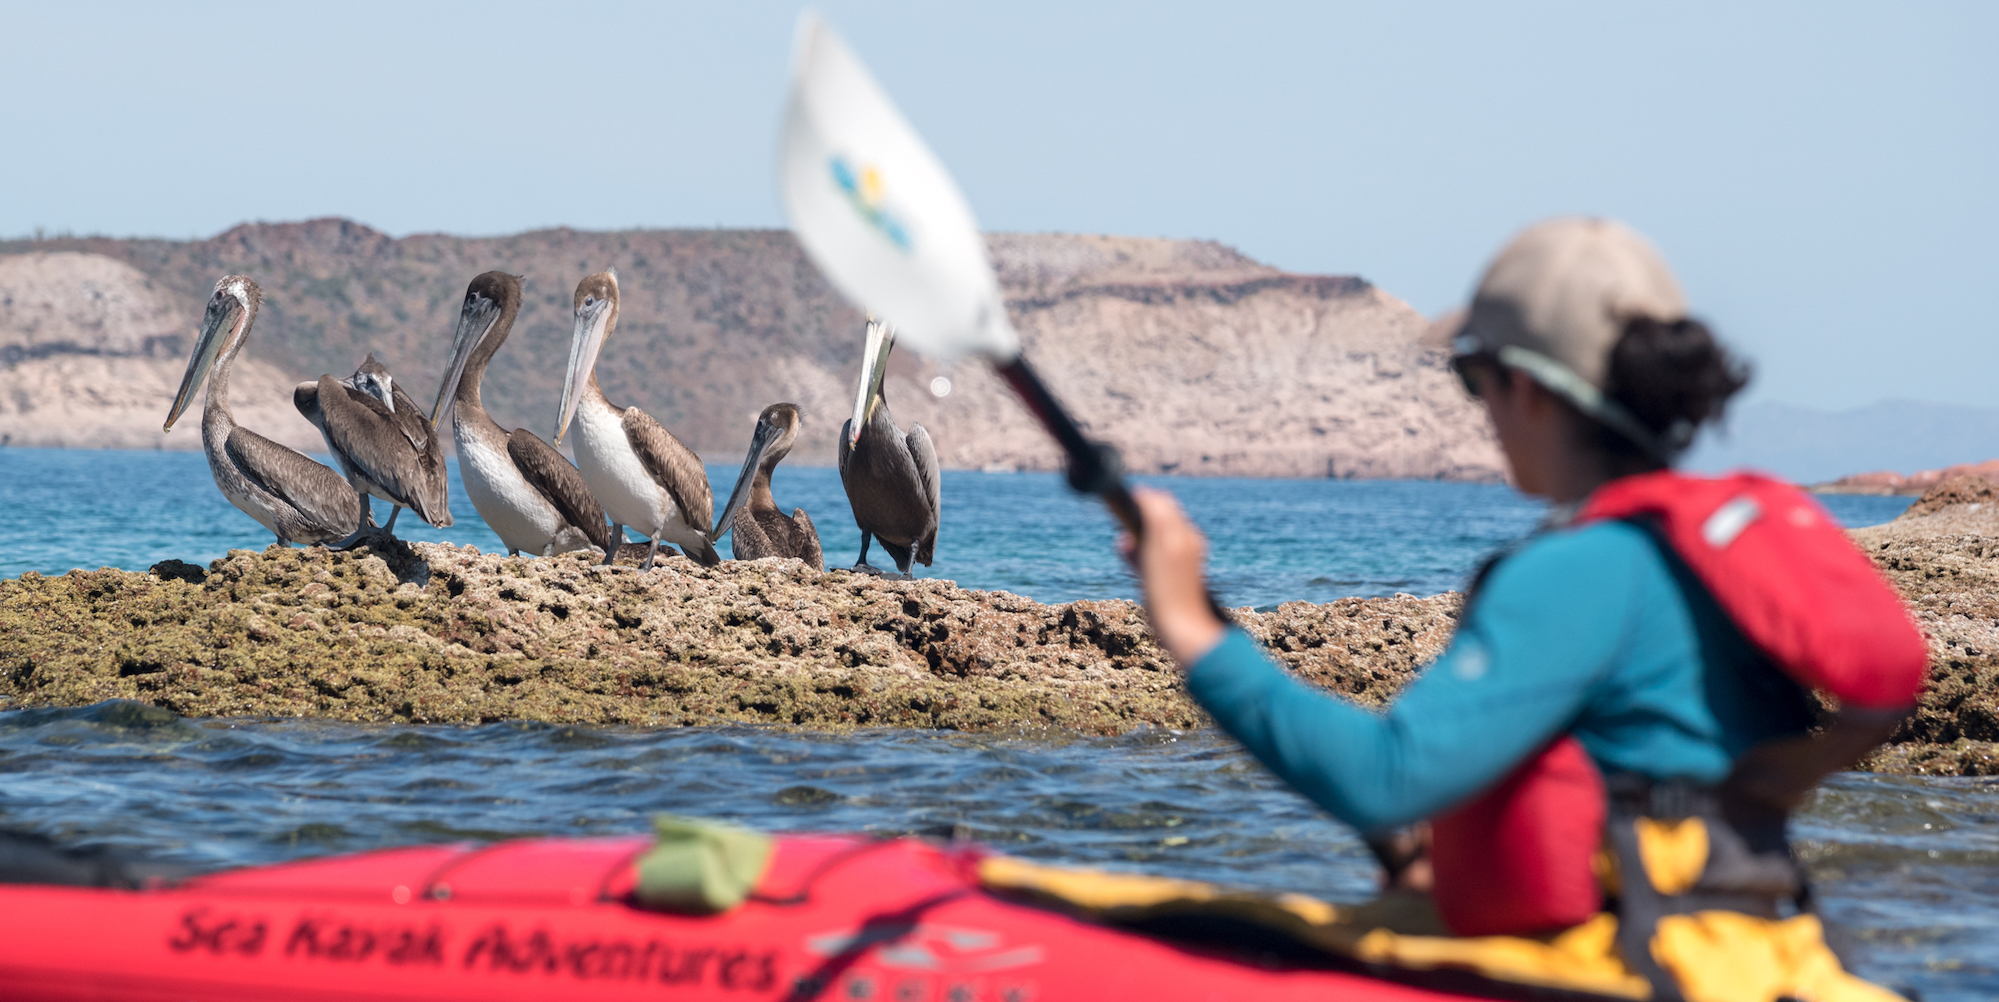 A woman sea kayaking next to a herd of brown pelicans on a rock in Baja California Sur